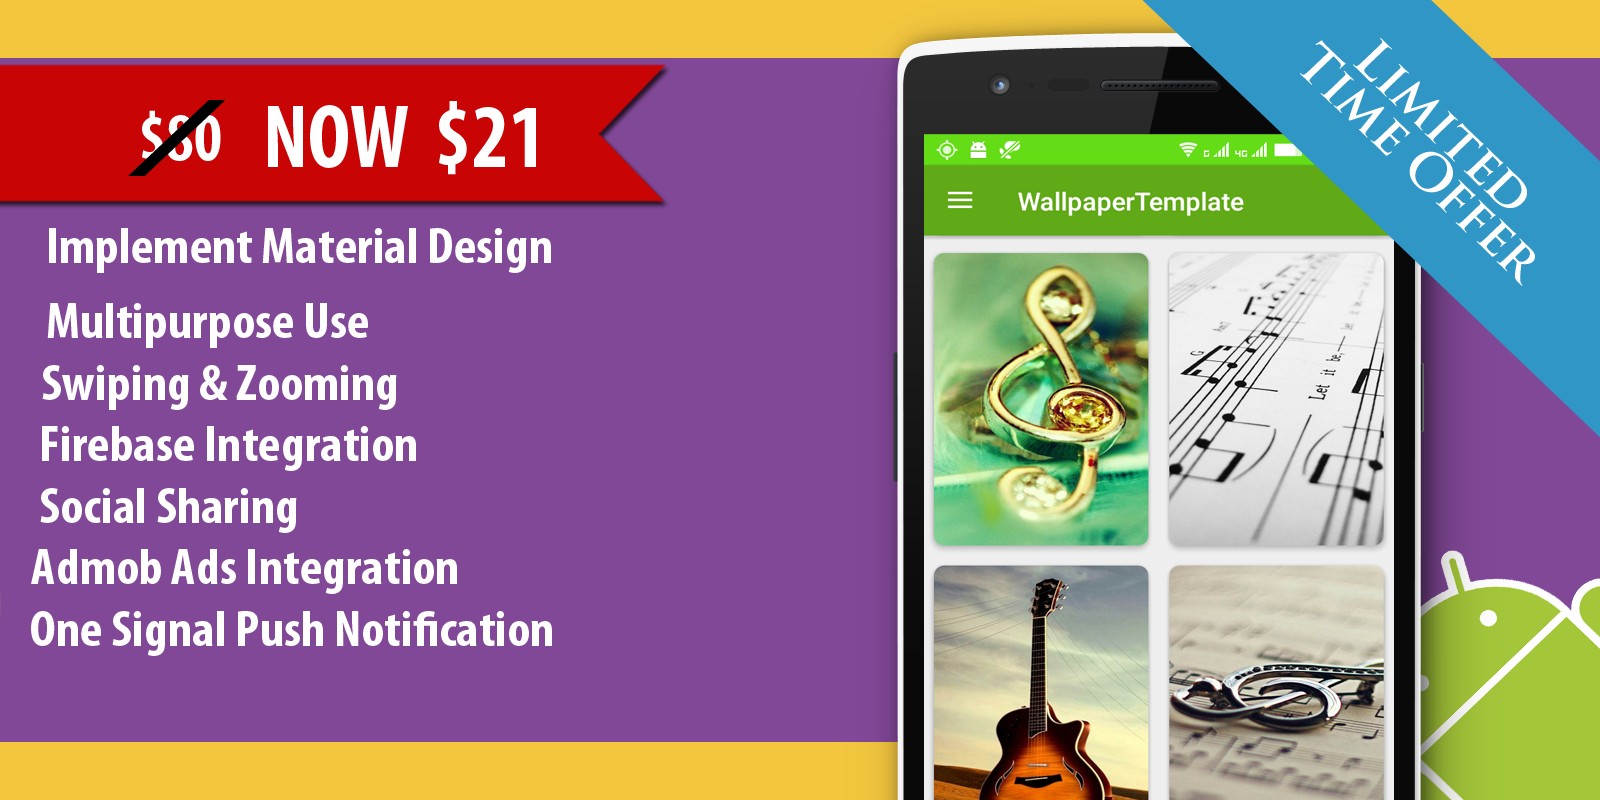 HD Wallpaper Template With CMS Admin Panel Android App Templates